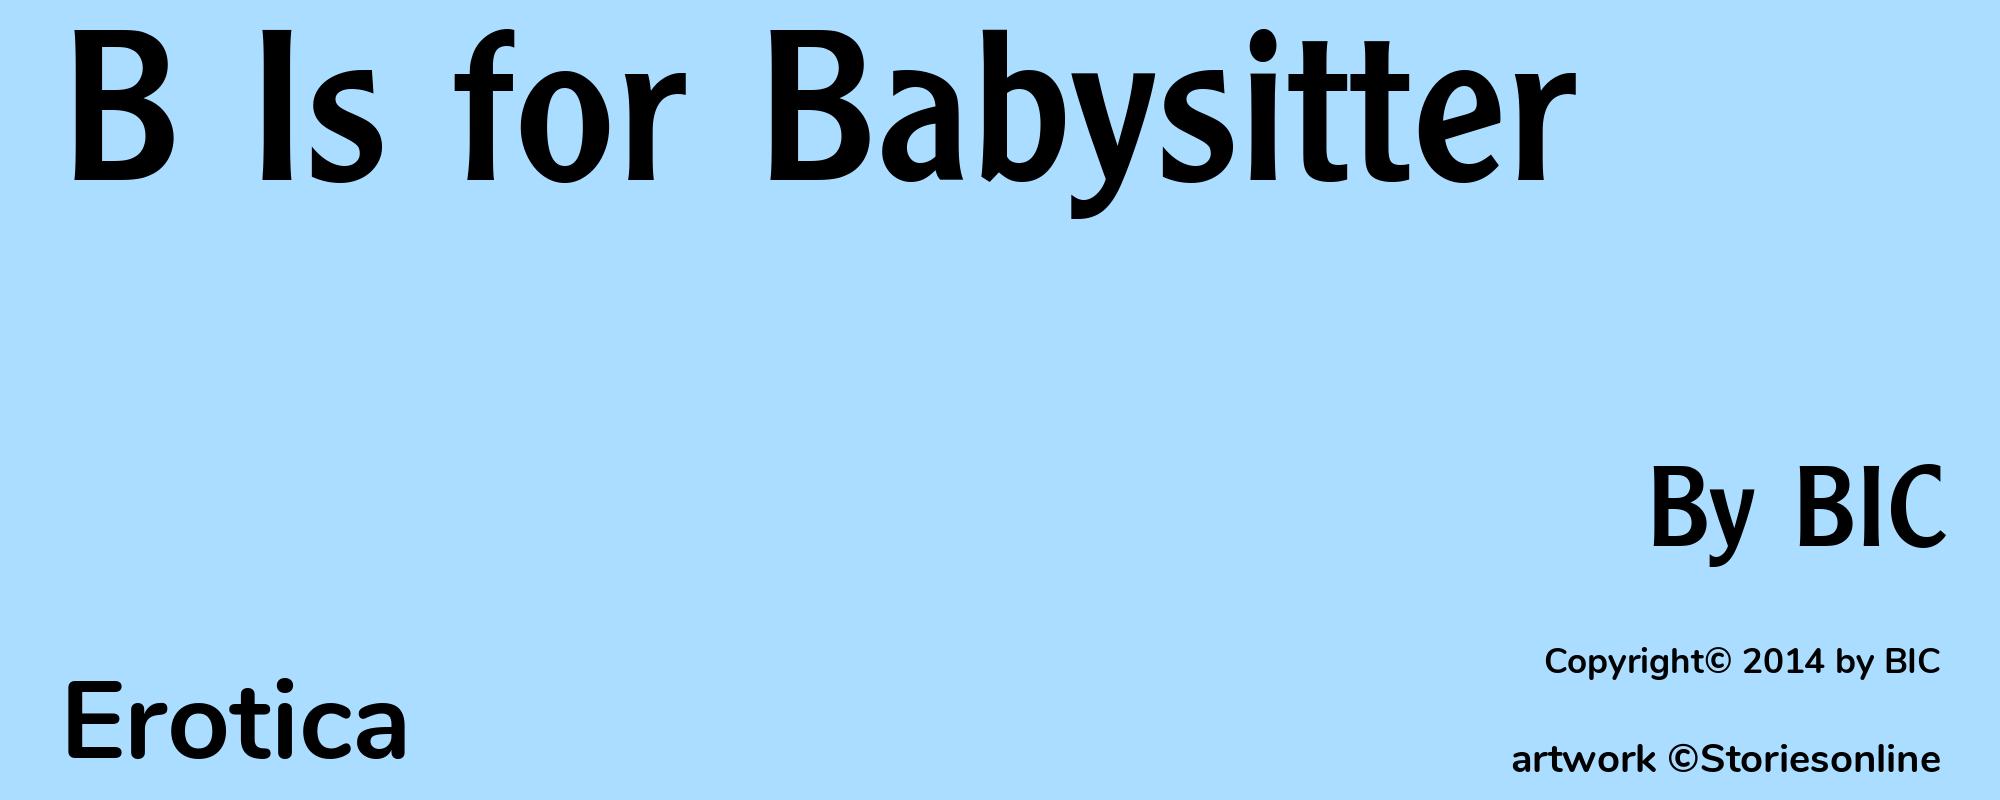 B Is for Babysitter - Cover